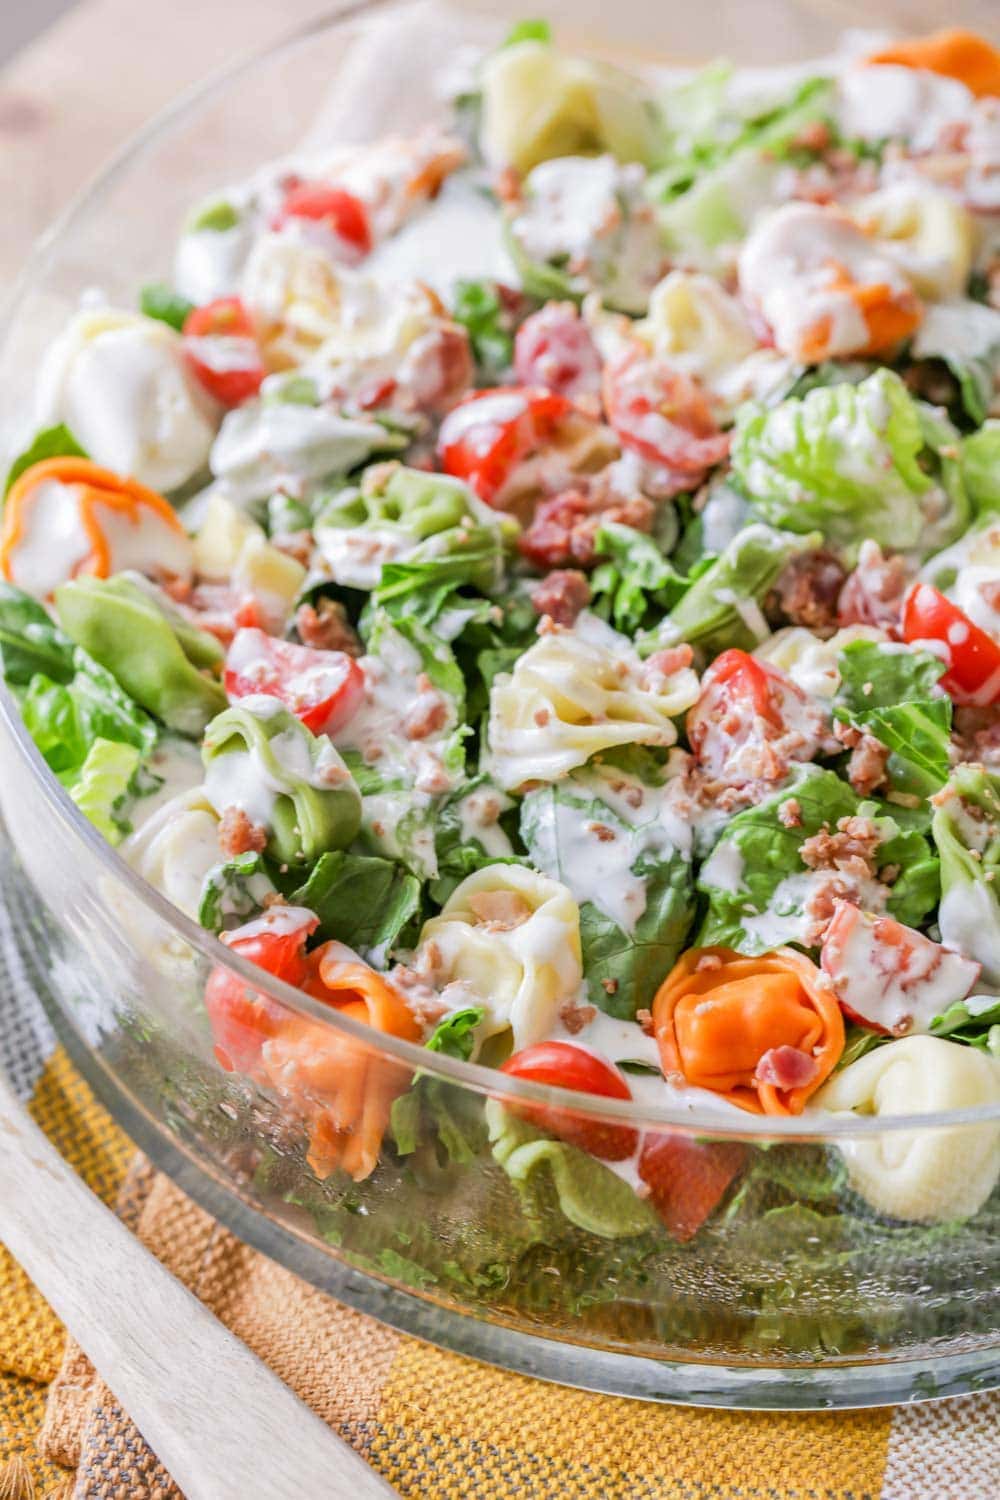 A close up of a glass bowl filled with tortellini salad.